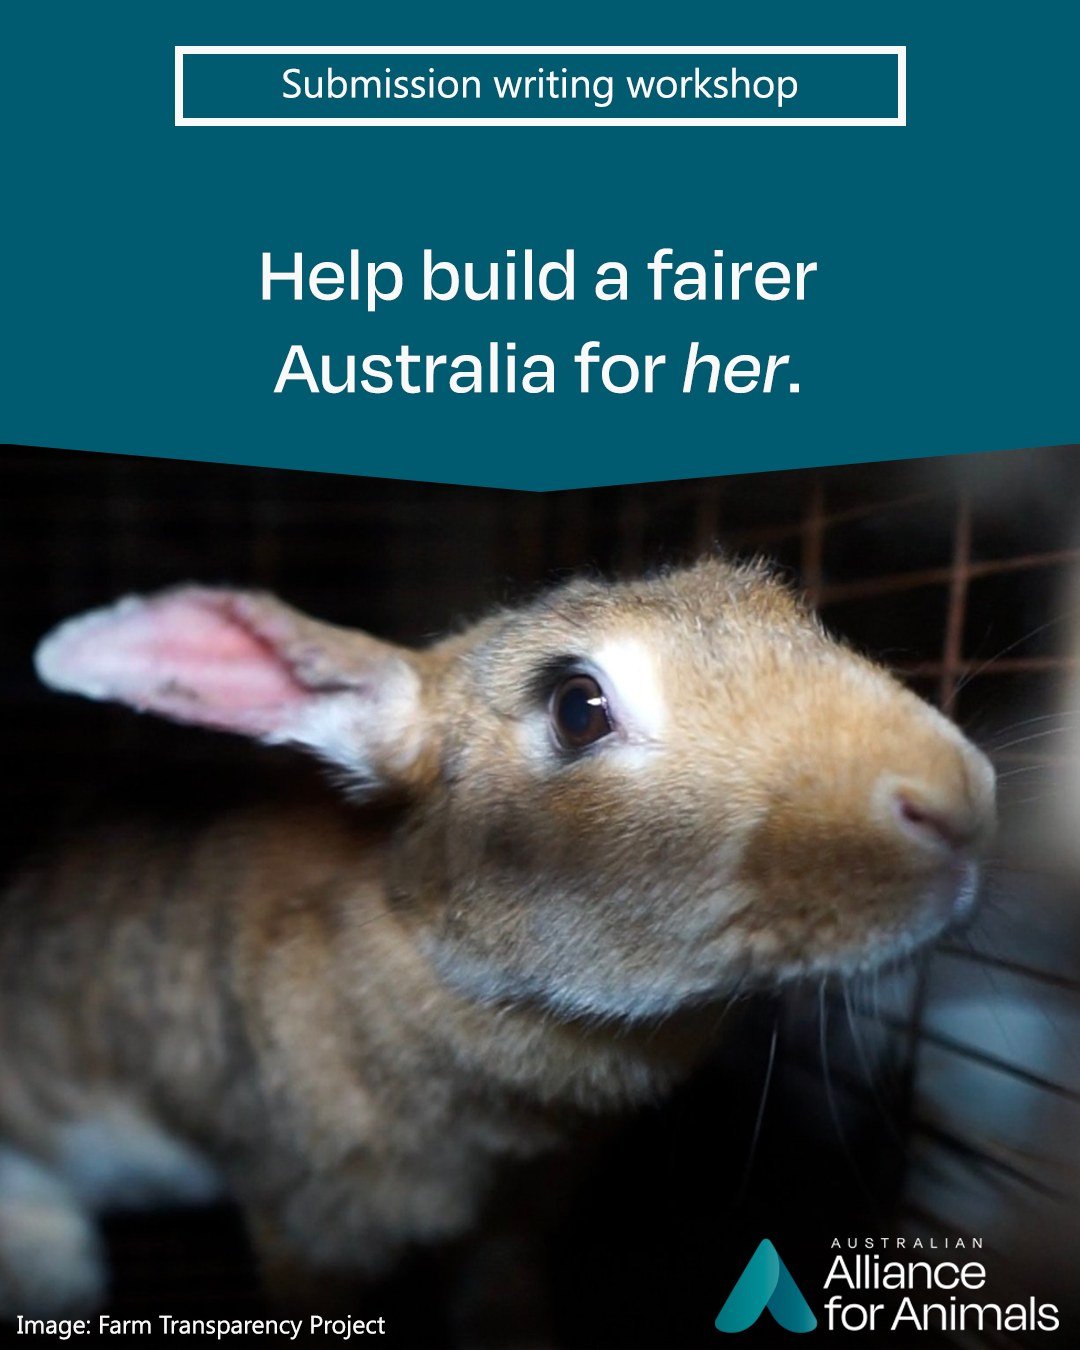 📢 Your input on Australia&rsquo;s Animal Welfare Strategy (AAWS) can help build a fairer Australia for animals. 

In order for the AAWS renewal to effectively fulfil its objectives, it is imperative that it integrates key components of the #FairGoFo